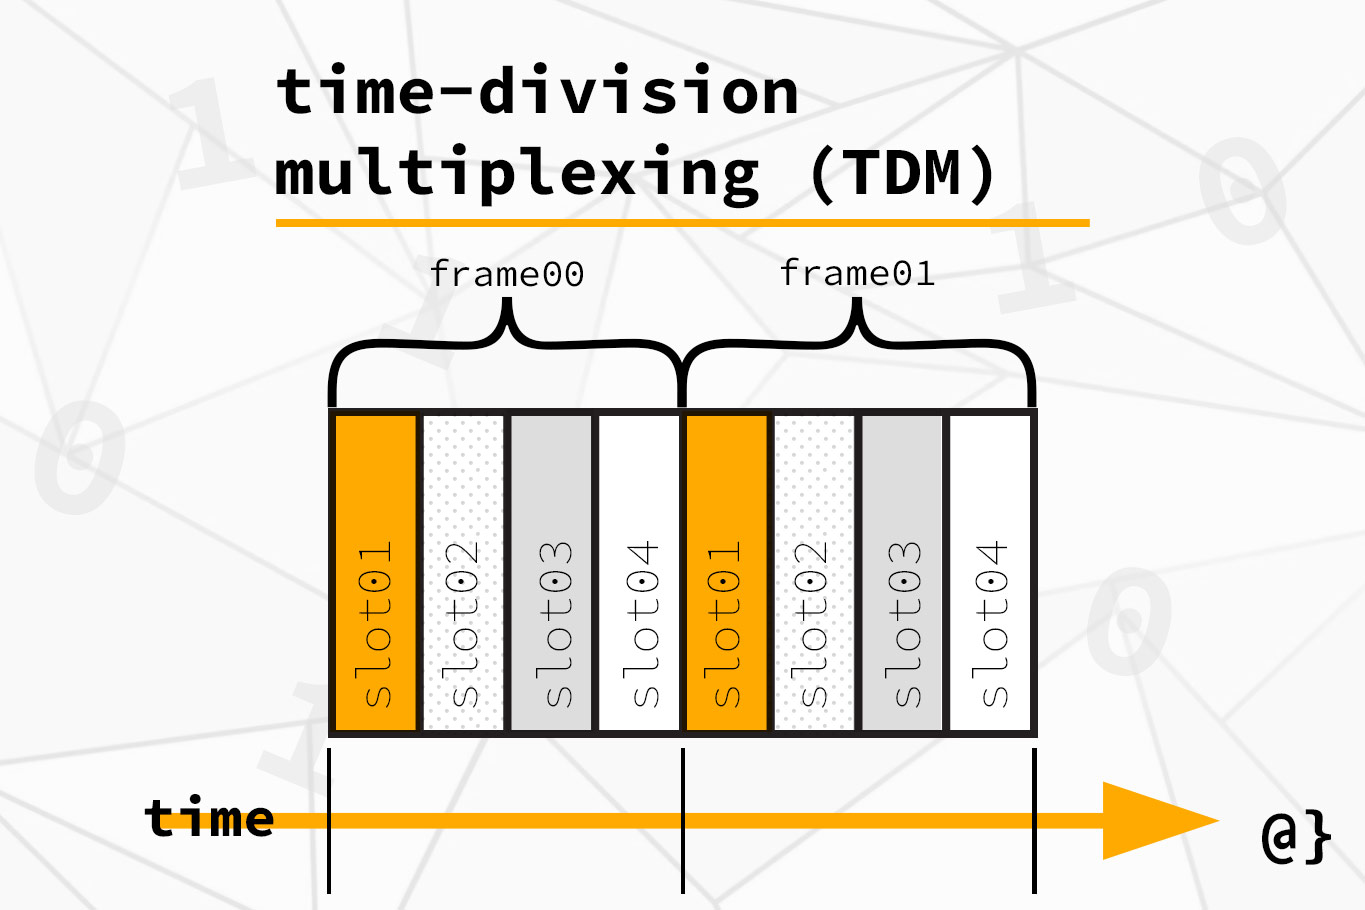 time division multiplexing